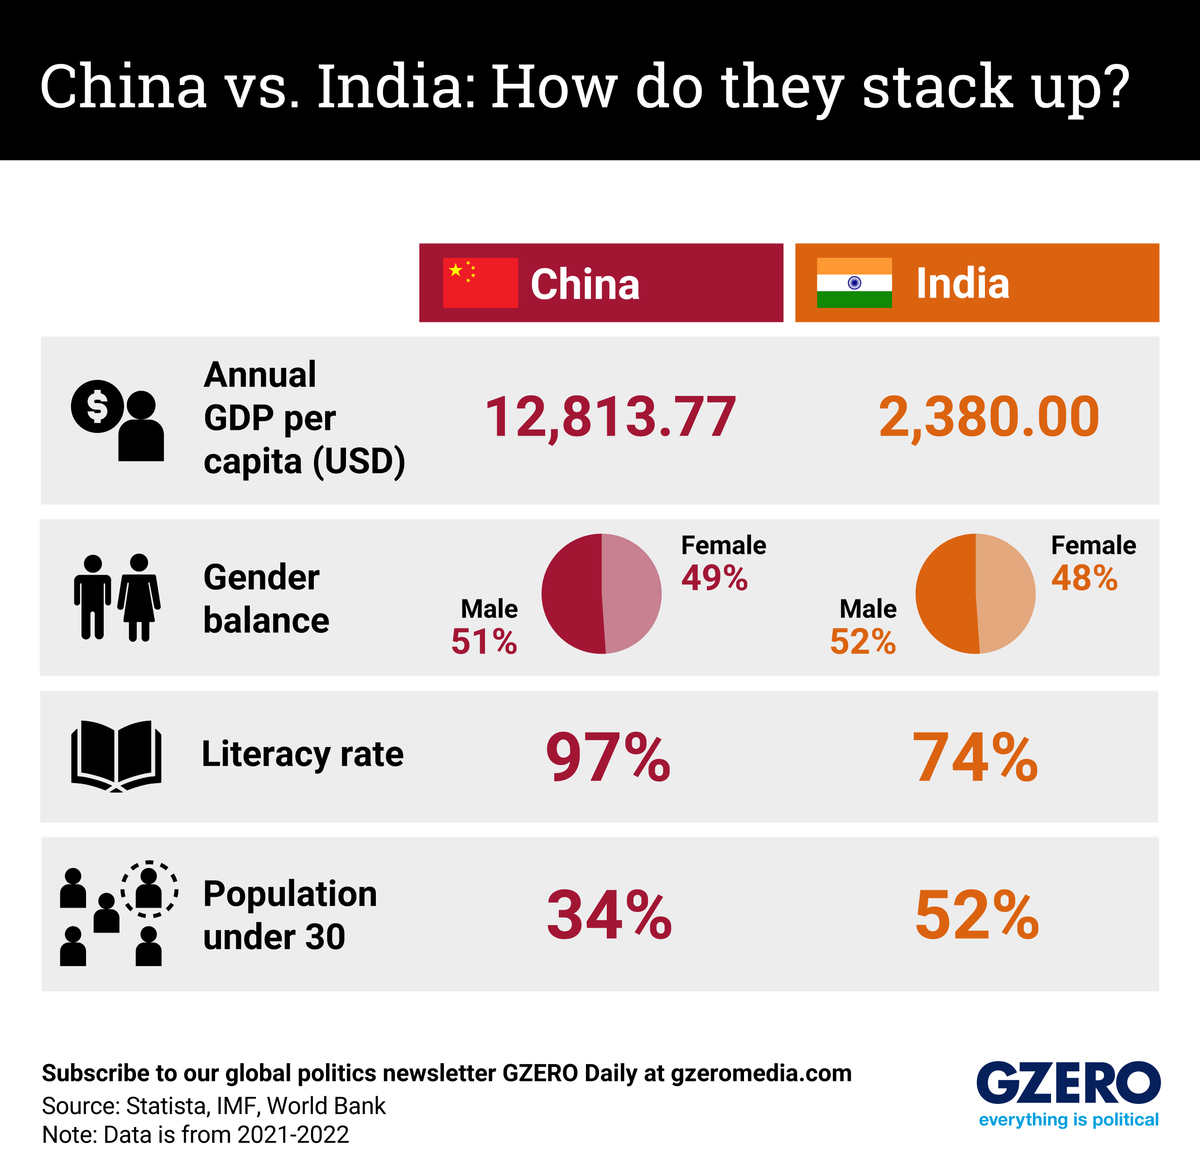 Side-by-side chart comparing China's and India's GDP per capital, gender balance, literacy rate, and young population